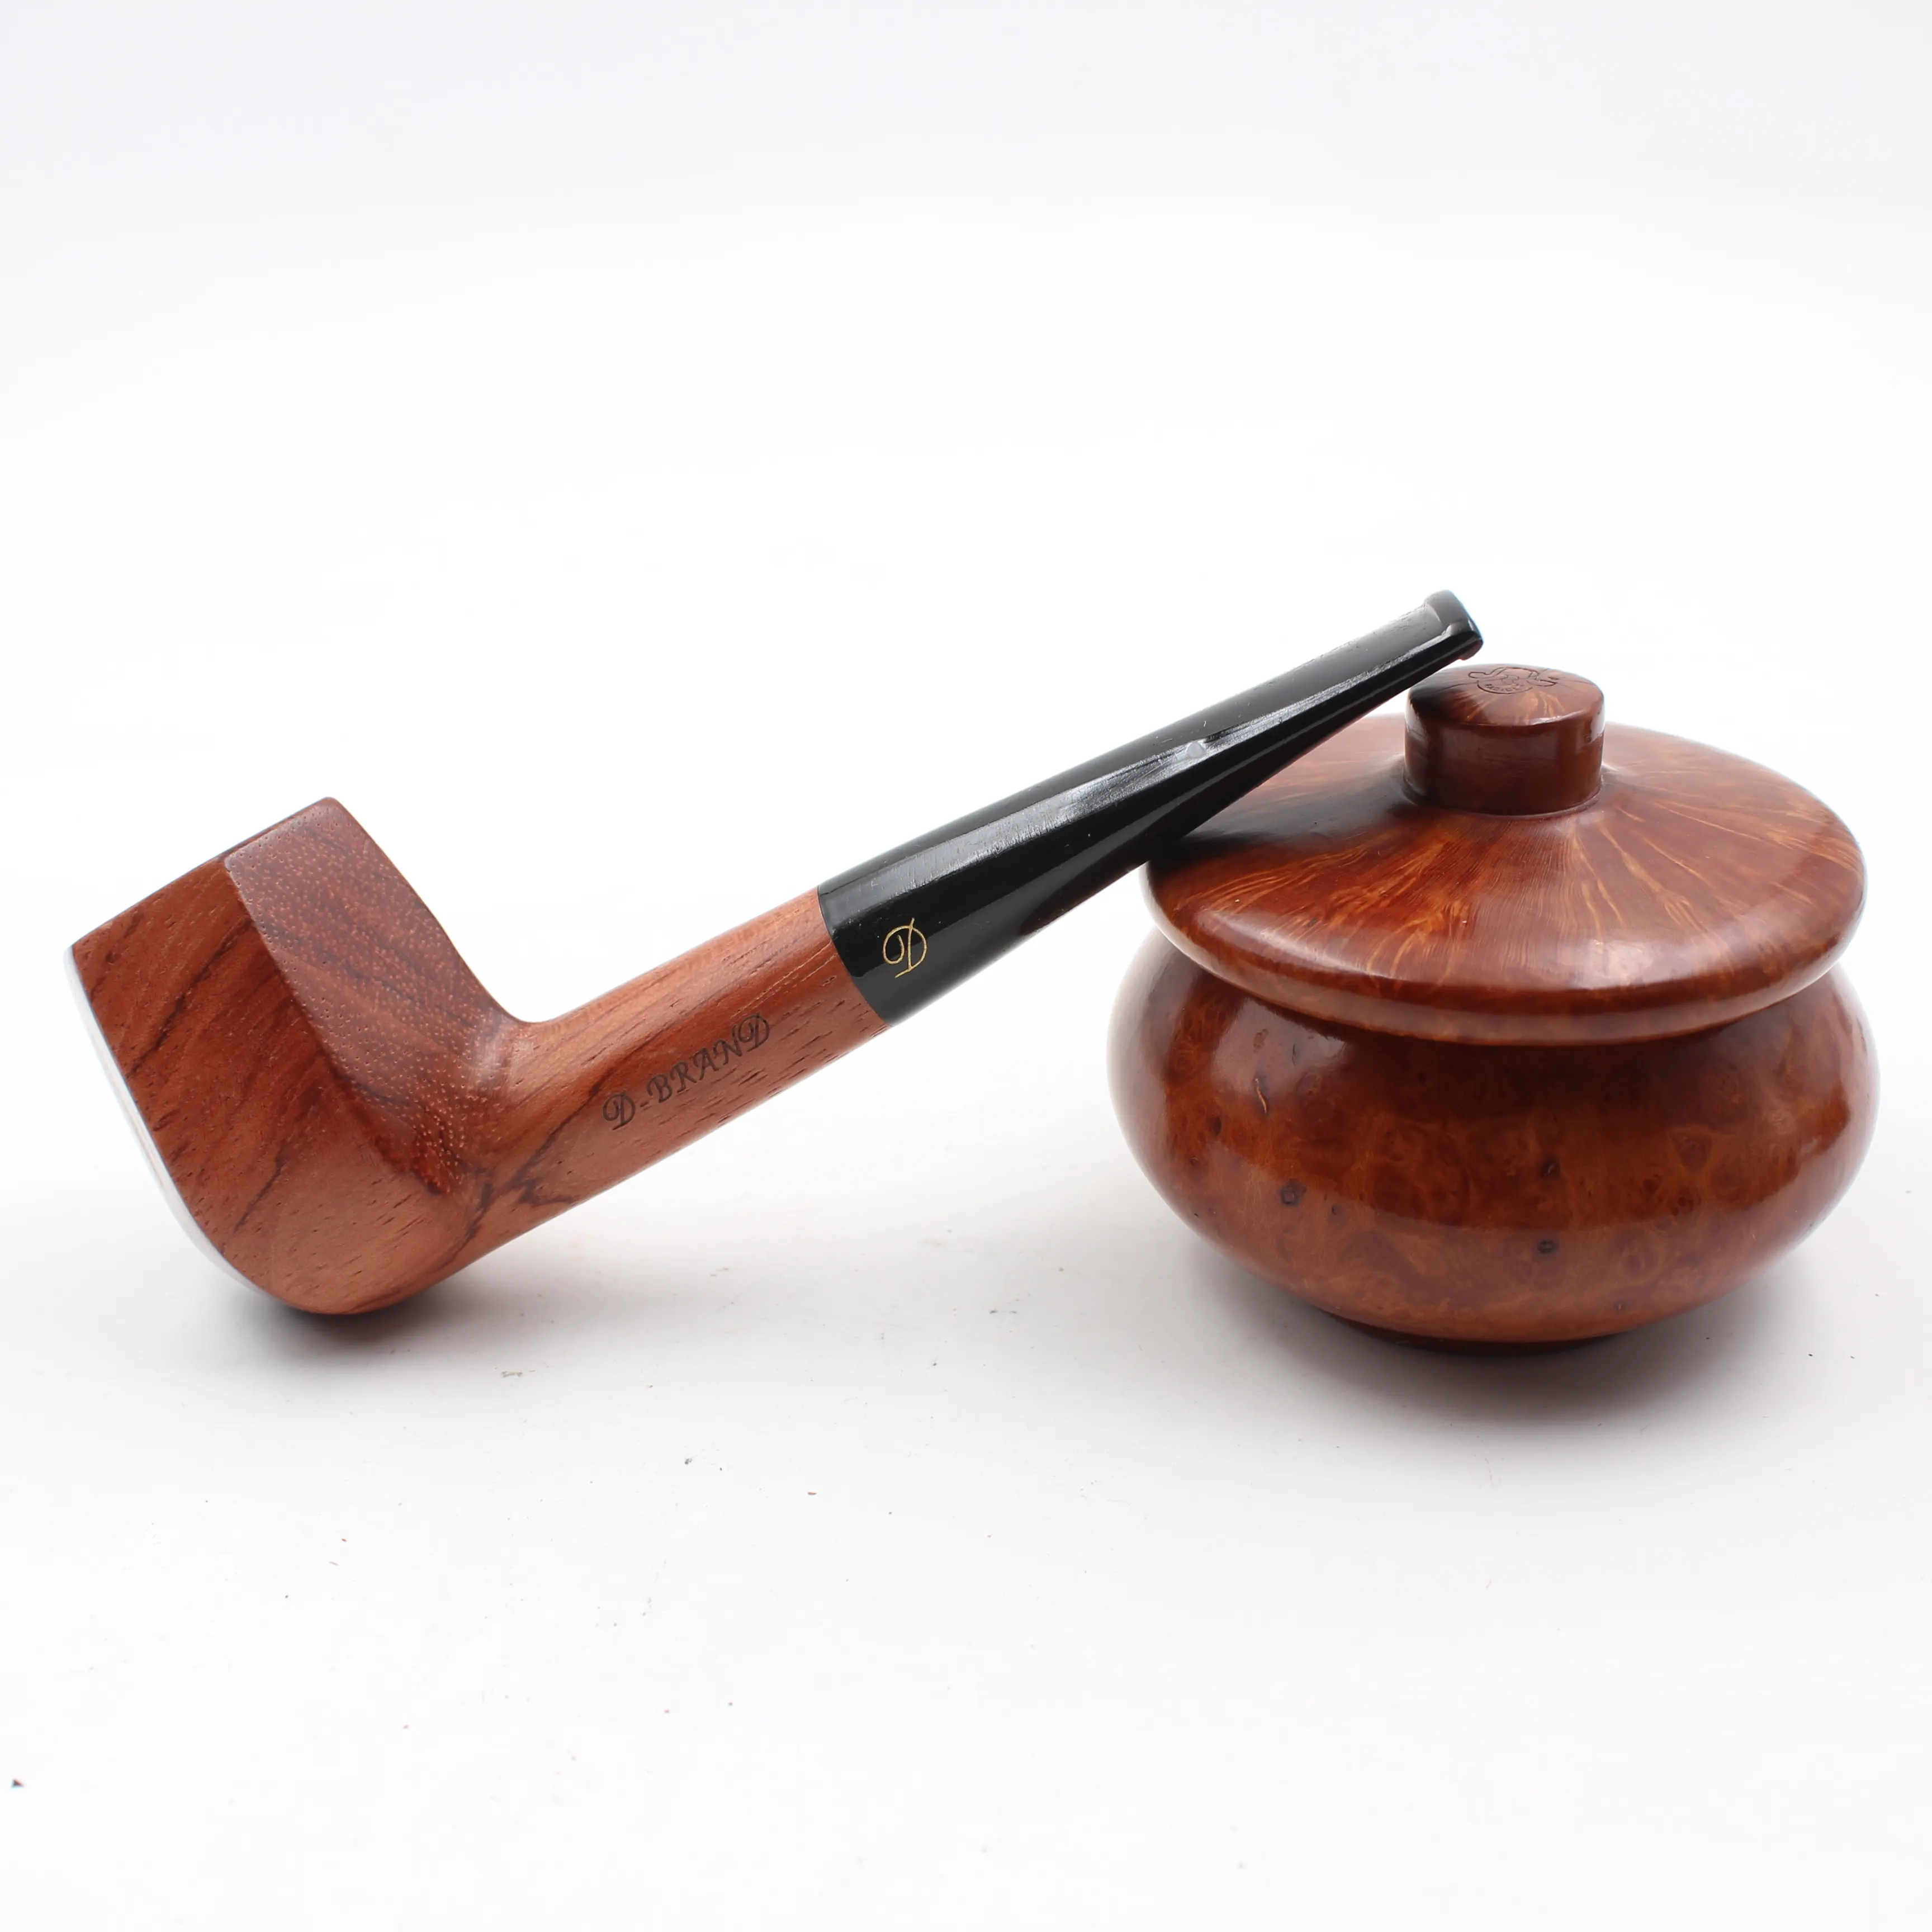 Classic Handmade Nature Solid Rosewood Pipe Curved Rose Wood Wood Tobacco Smoke Pipe Rd-537